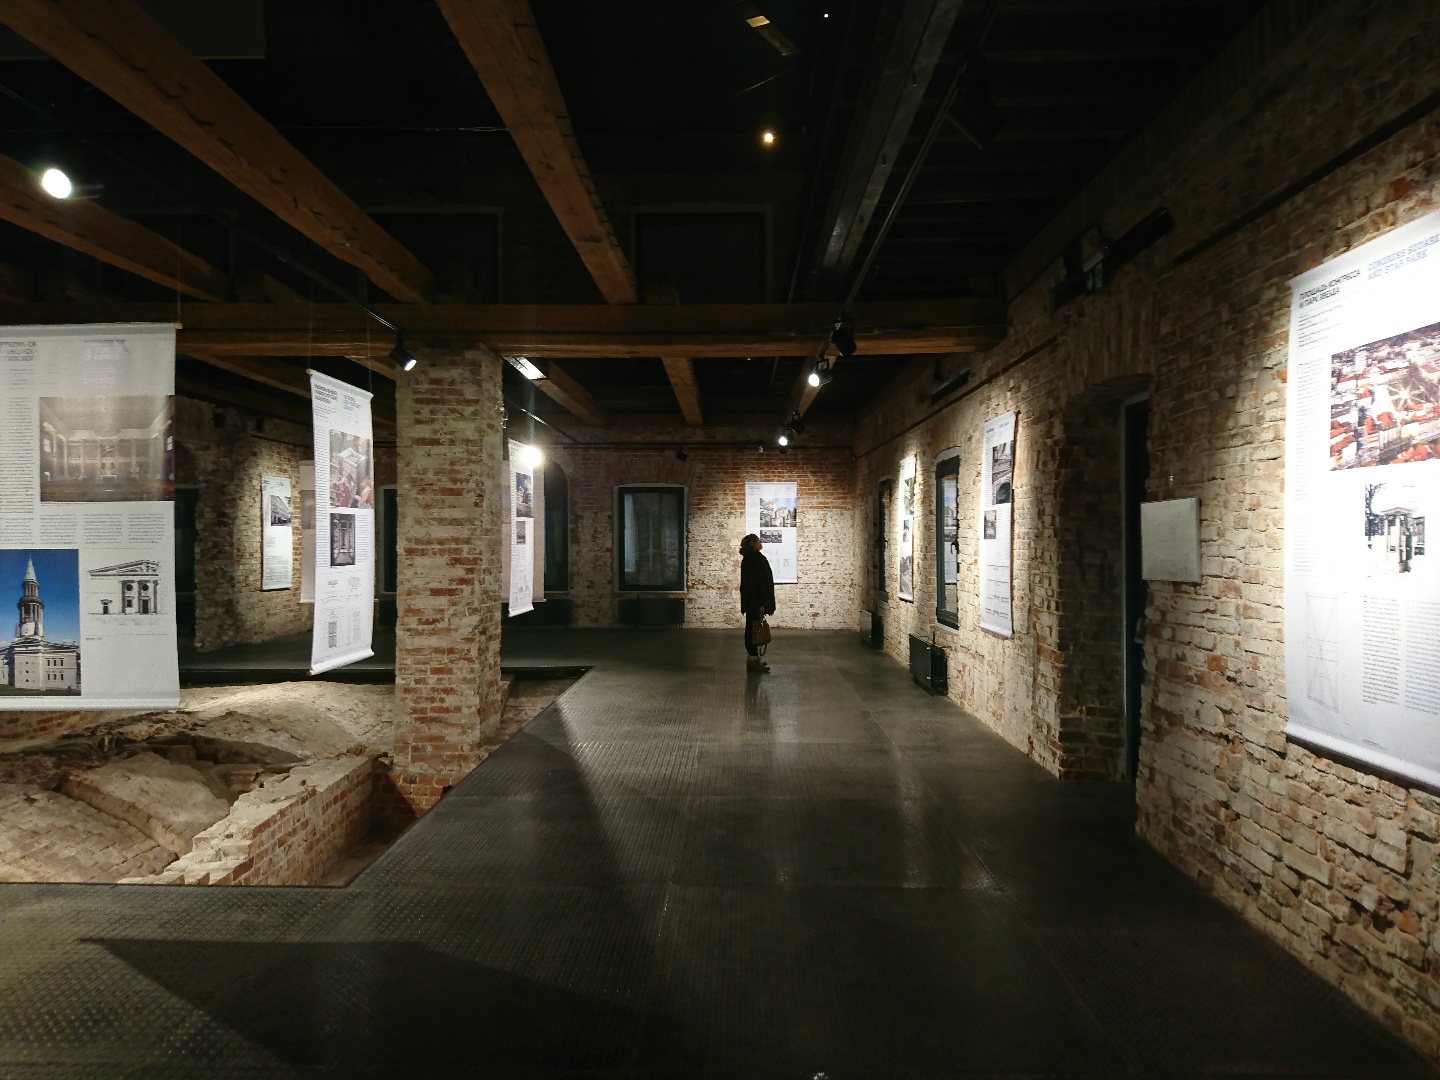 The exhibition Plečnik's Ljubljana at the Schusev State Museum of Architecture in Moscow